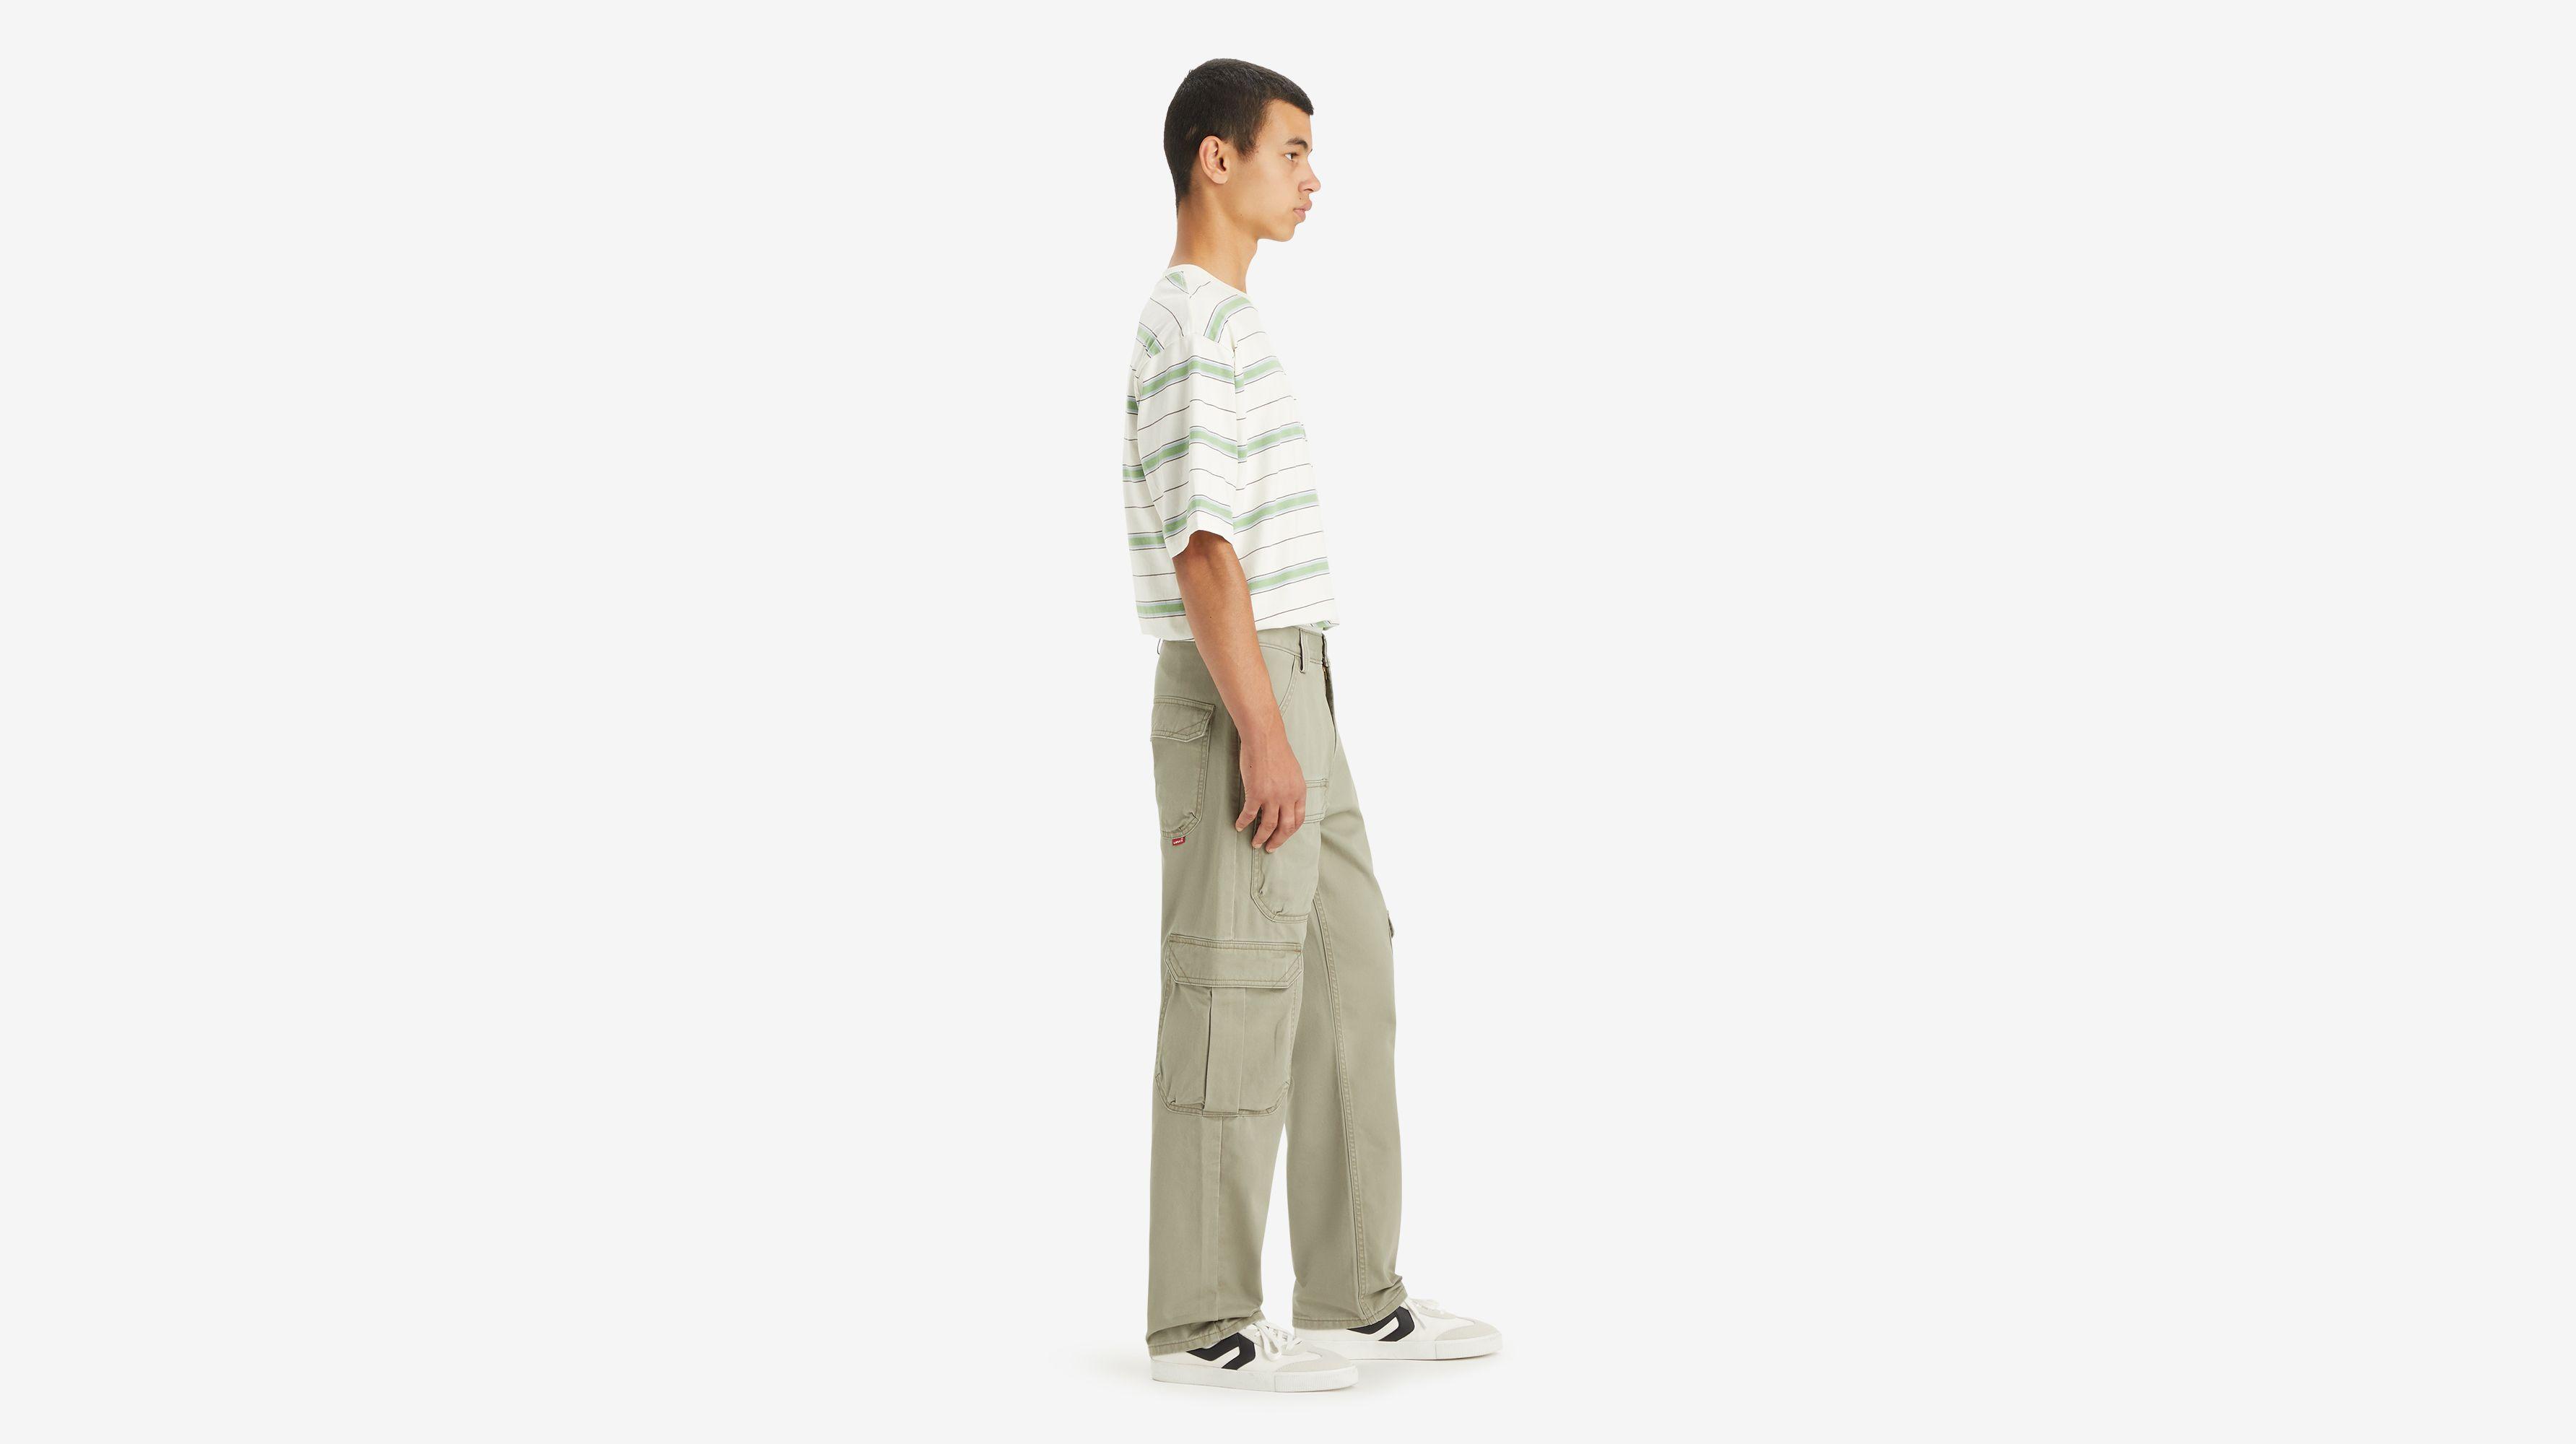 Levi's® Men's Stay Loose Cargo Pants - Vetiver Twill